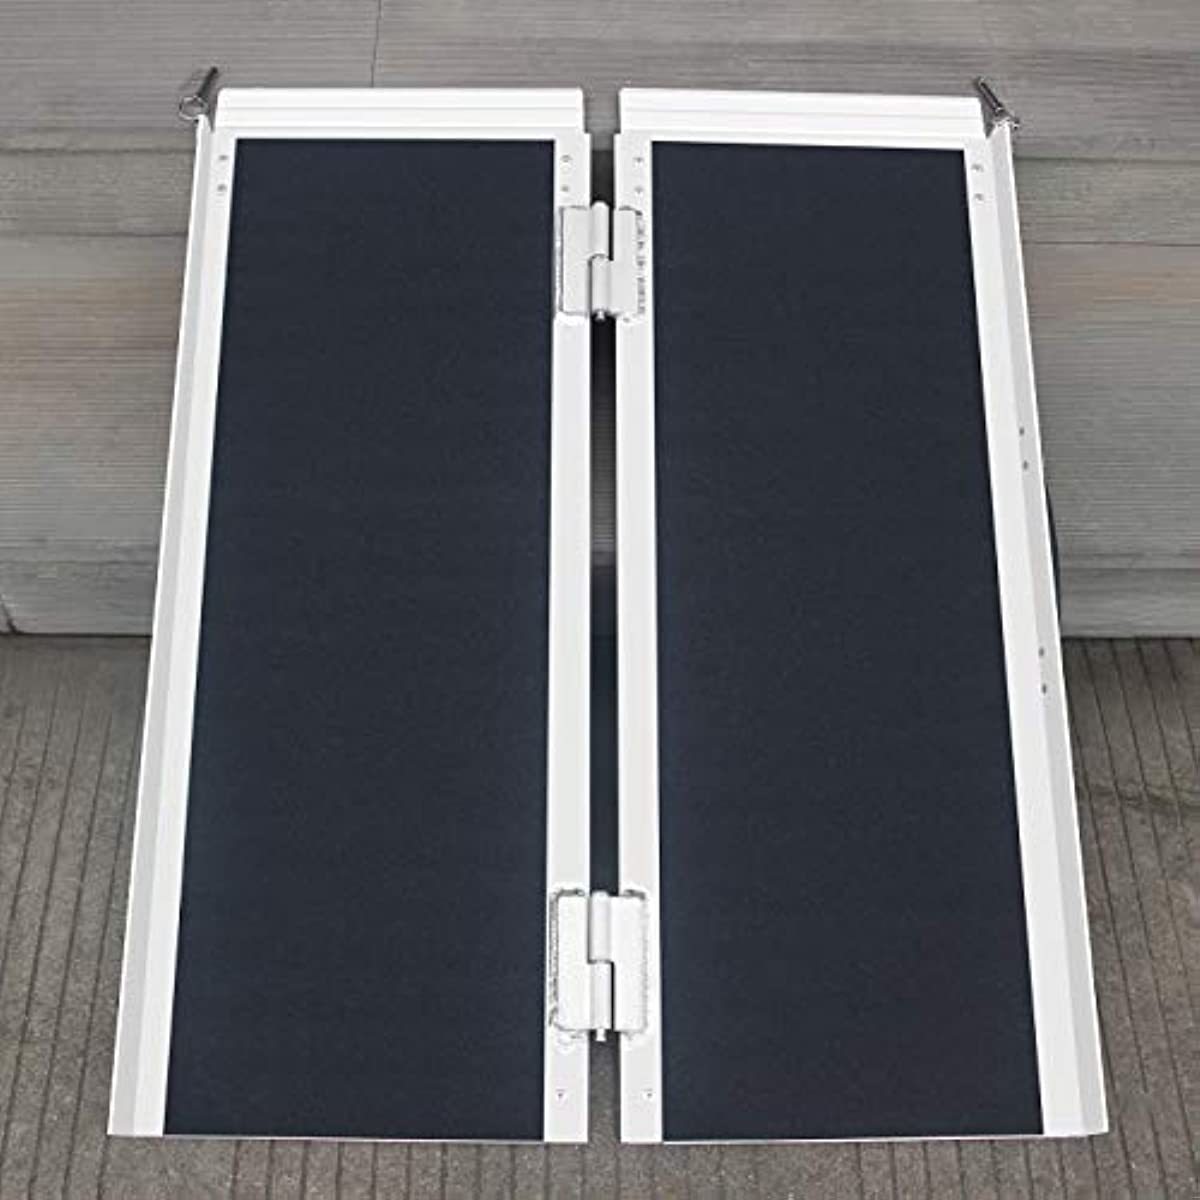 4FT Wheelchair Ramp,Non-Slip Portable Aluminum Ramp for Wheelchairs Single Fold 600lbs for Steps Stairs and Thresholds，Stairs, Doorways, Scooter (28.2\" W x 47.8\" L) (Non-Skid 4FT)